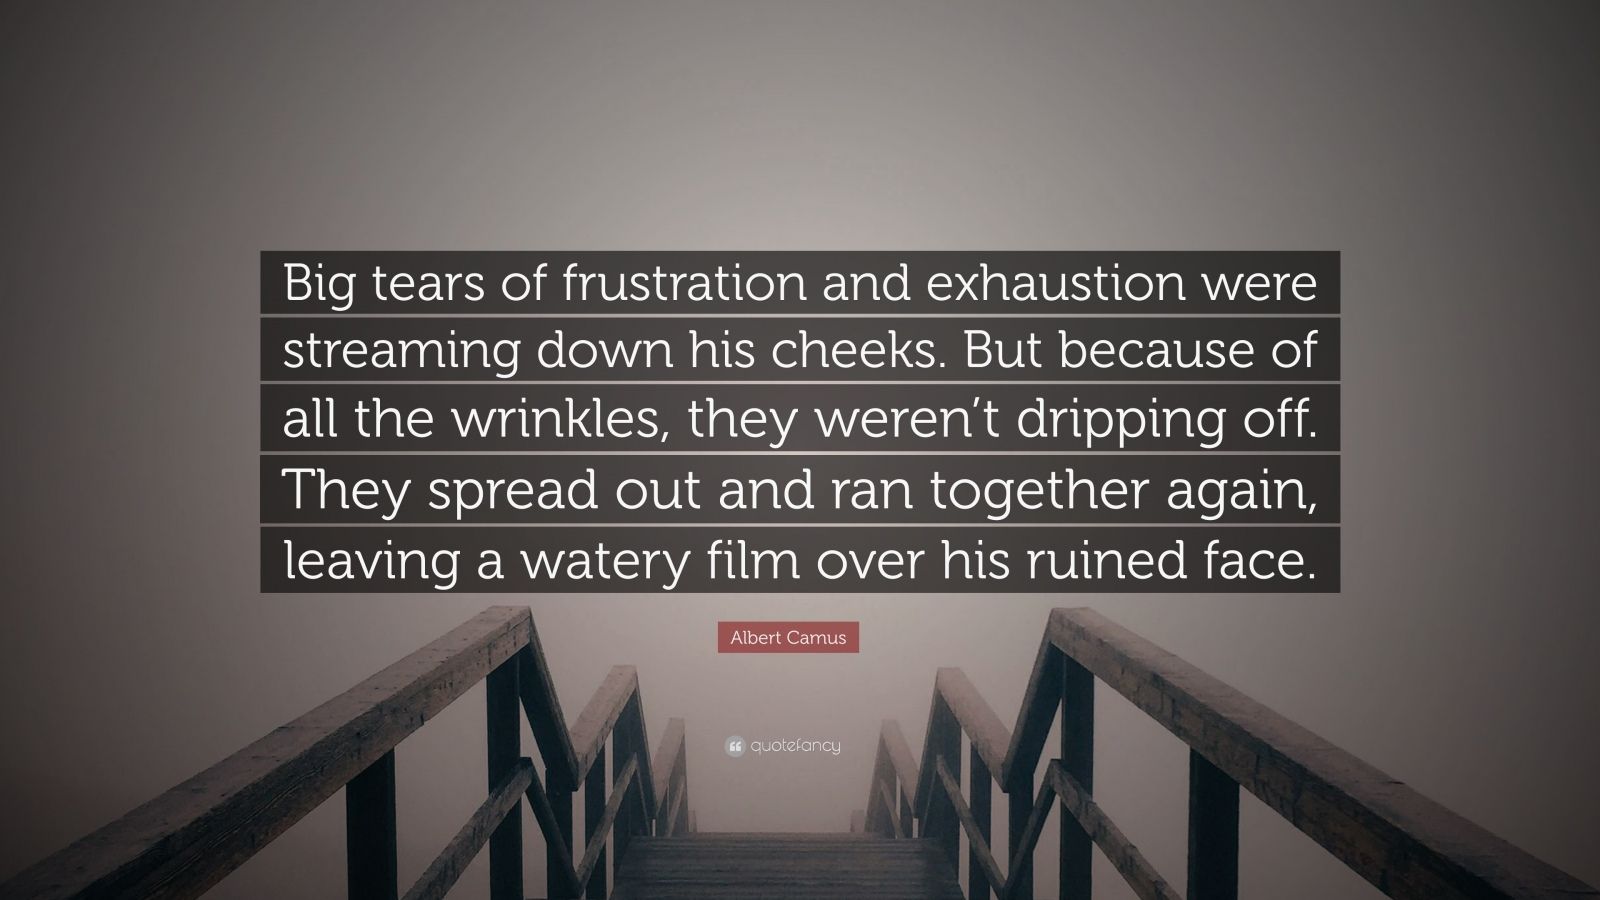 Albert Camus Quote: “Big tears of frustration and exhaustion were